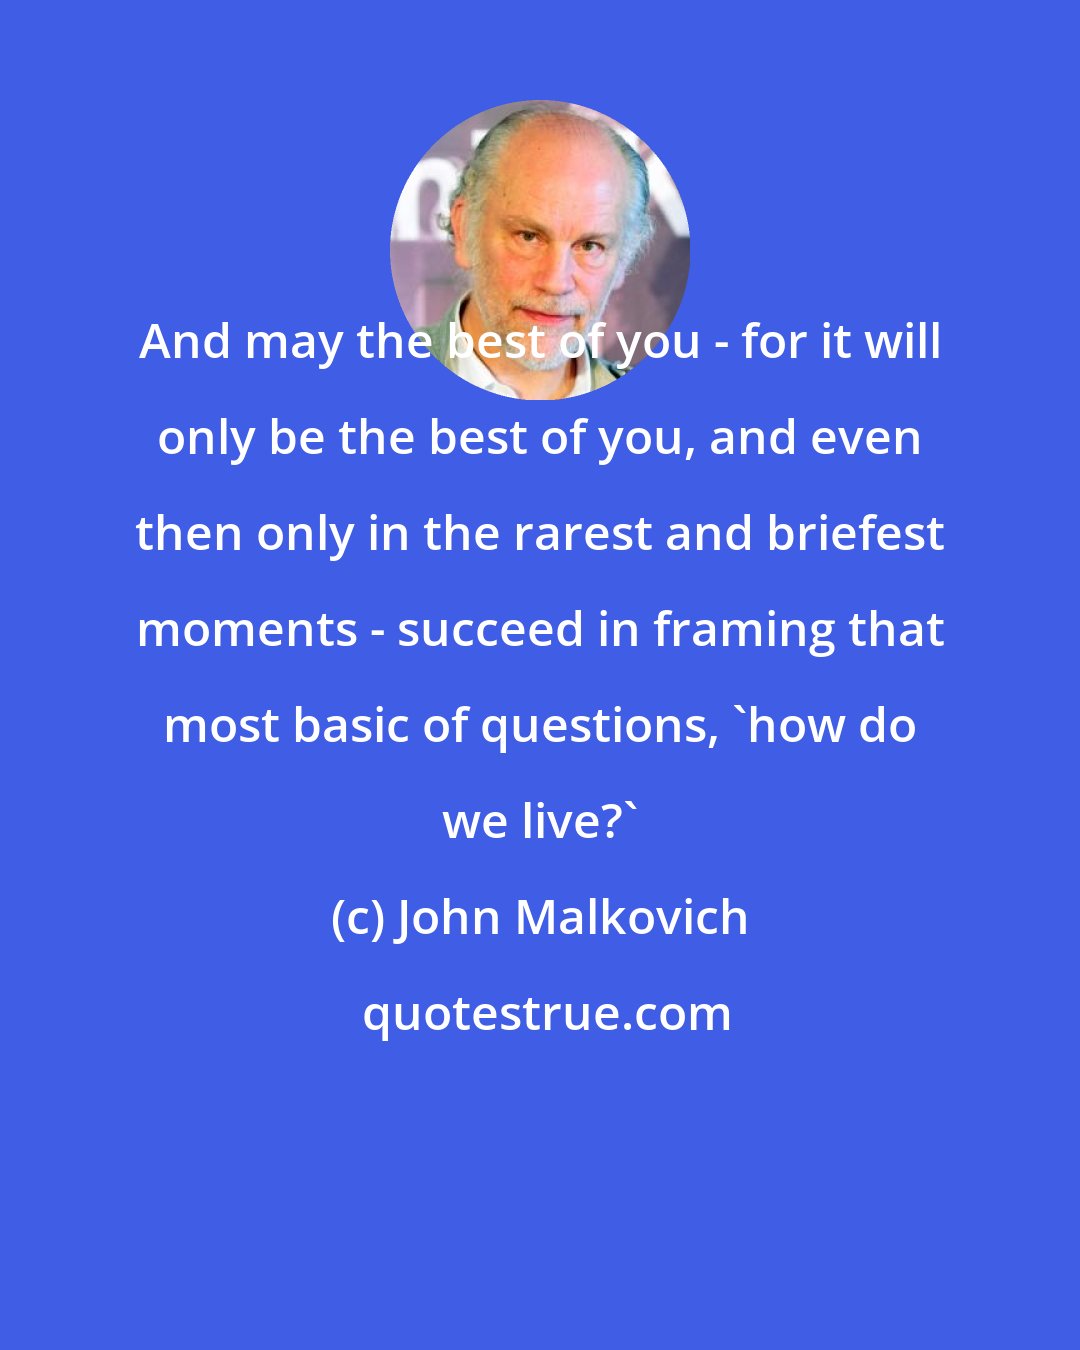 John Malkovich: And may the best of you - for it will only be the best of you, and even then only in the rarest and briefest moments - succeed in framing that most basic of questions, 'how do we live?'